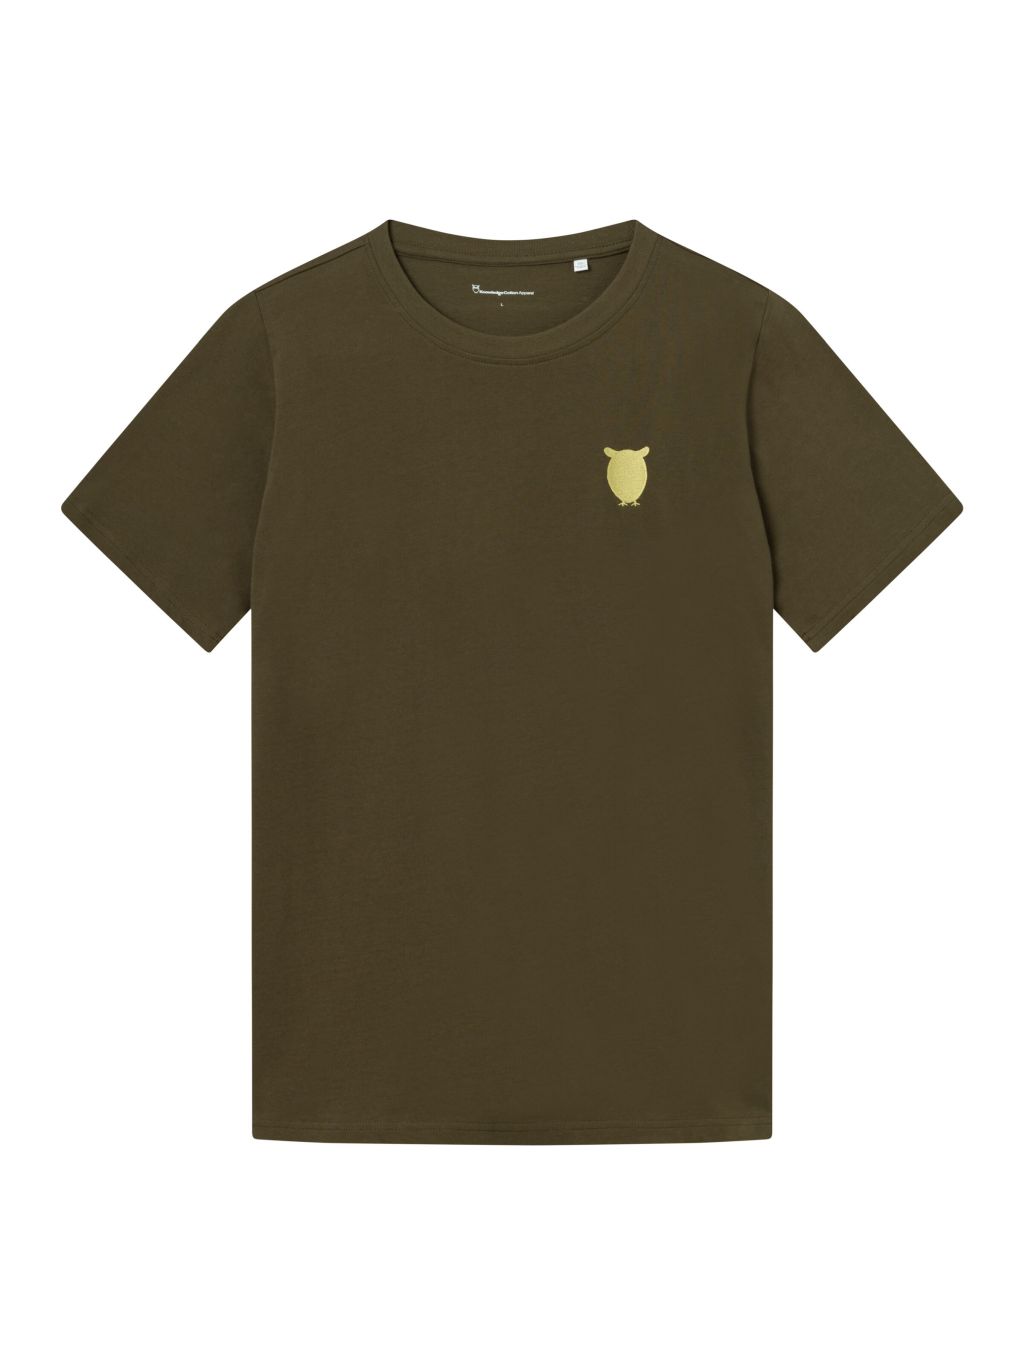 Regular Fit Owl Chest Embroidery Dark Olive L